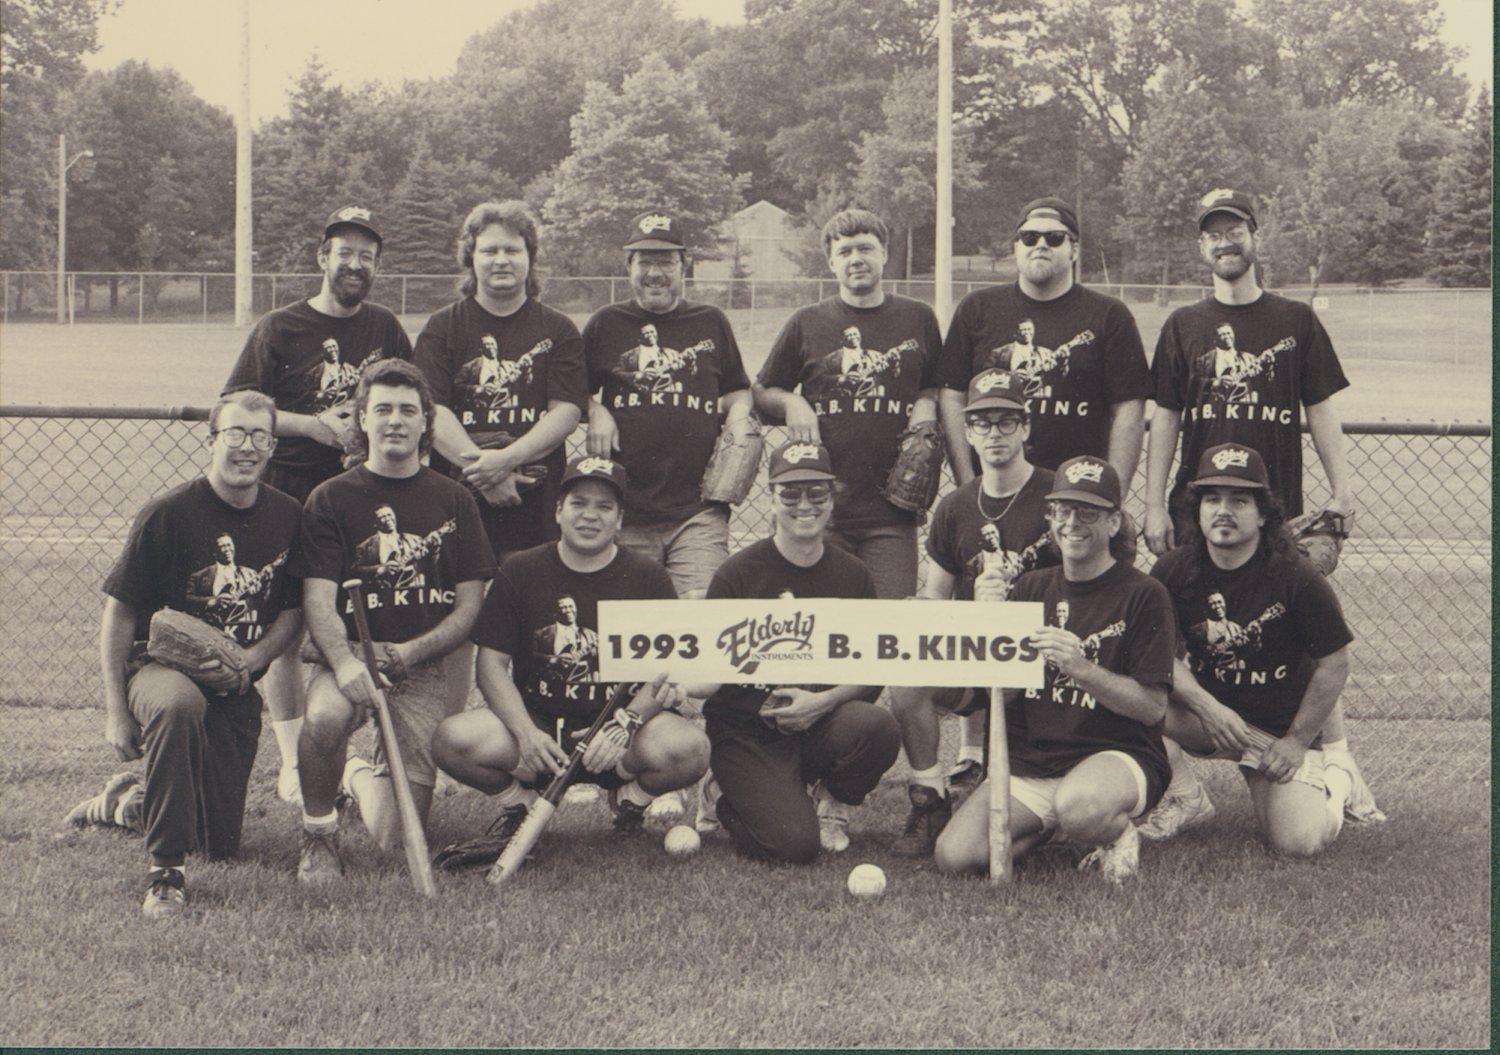 The Elderly baseball club, named after blues icon B.B. King, took time out for a photo in 1993.